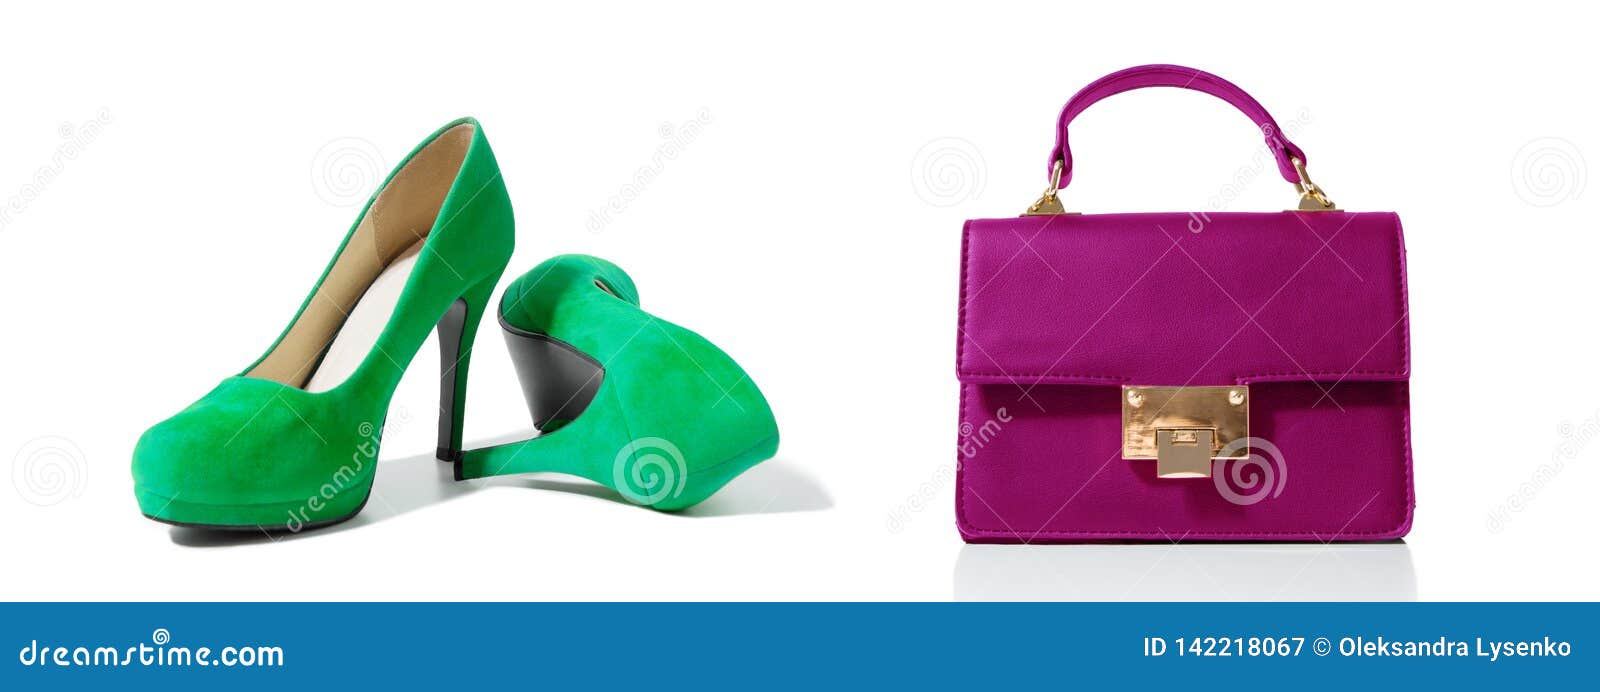 closeup of fashionable high heels shoes and woman bag  on white background. green color shoe and pink handbag on floor.